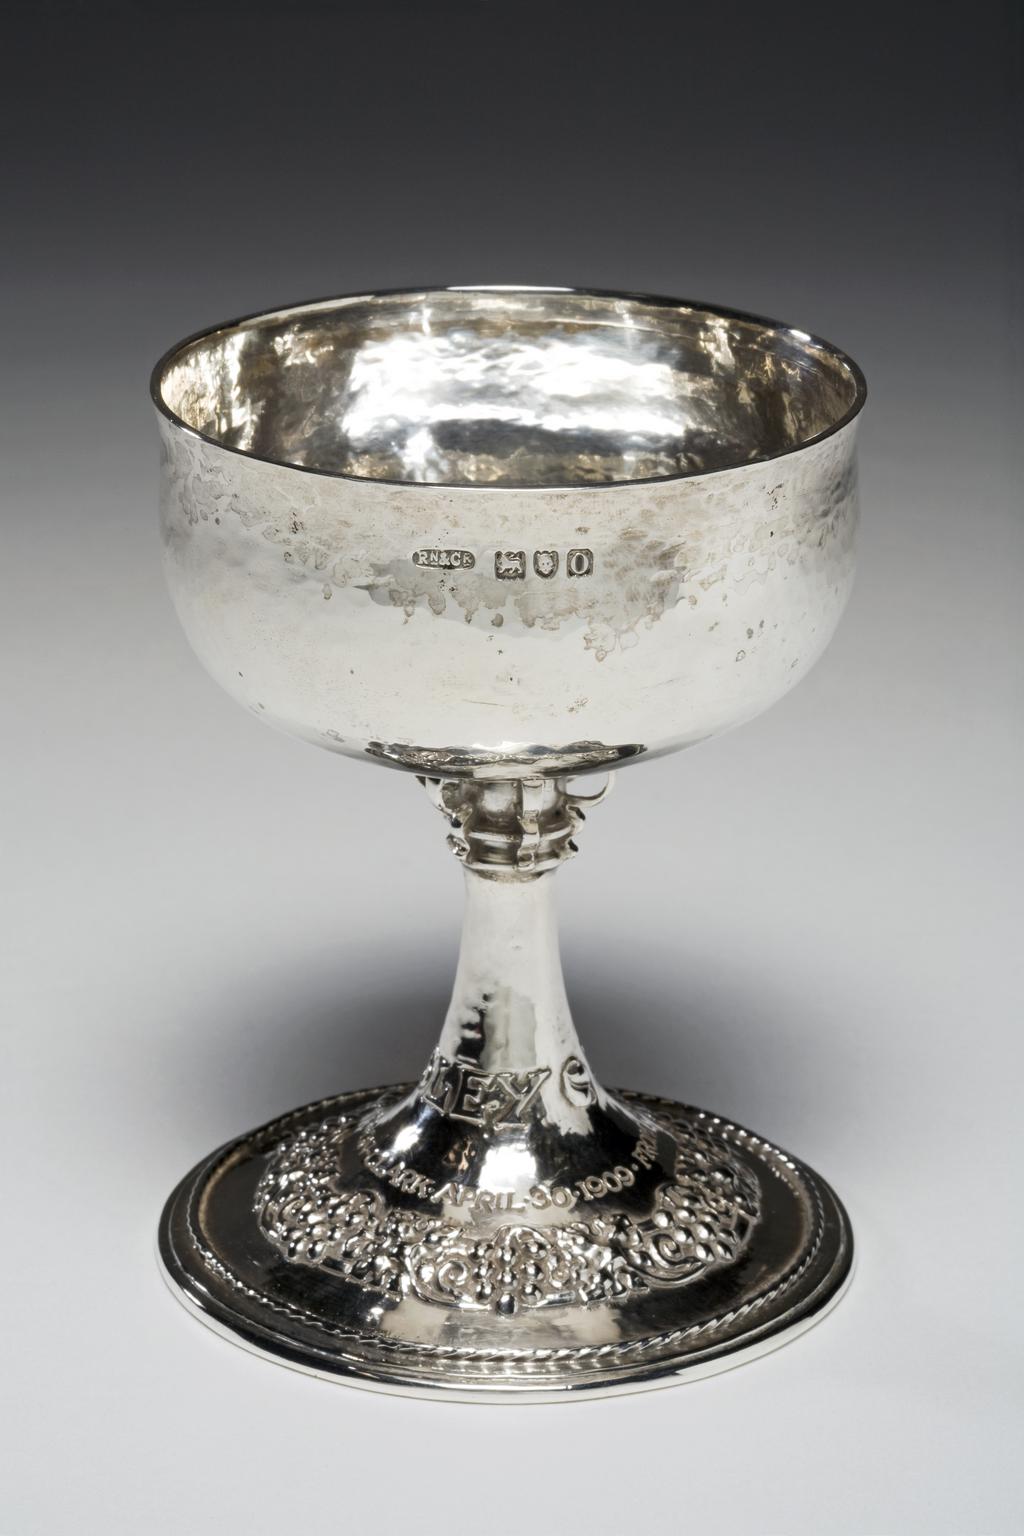 An image of Goblet. Ramsden & Carr. Ramsden, Omar (British, 1873-1939). Carr, Alwyn (British,1872-1940). Production Place:  England, London. The low circular bowl has bombé sides and a slightly everted rim. It is supported by a trumpet-shaped foot with six applied volutes at the top. The foot has an applied rope border set in from the edge, and is embossed and chased with a circle of fruiting vine. The lower part of the stem is embossed with ‘TO LESLEY’ and below is engraved ‘FROM HER GODFATHER C.S. GORDON CLARK APRIL 1909’. Silver, with hammered surface, embossed and chased decoration, and embossed, and engraved inscriptions. Height, overall, 10.6 cm, diameter, to rim, 8 cm, diameter, foot, 8.3, cm, weight, whole, 140 g, 1909. Arts and Crafts. Notes: It is unclear which silversmiths are associated with London.